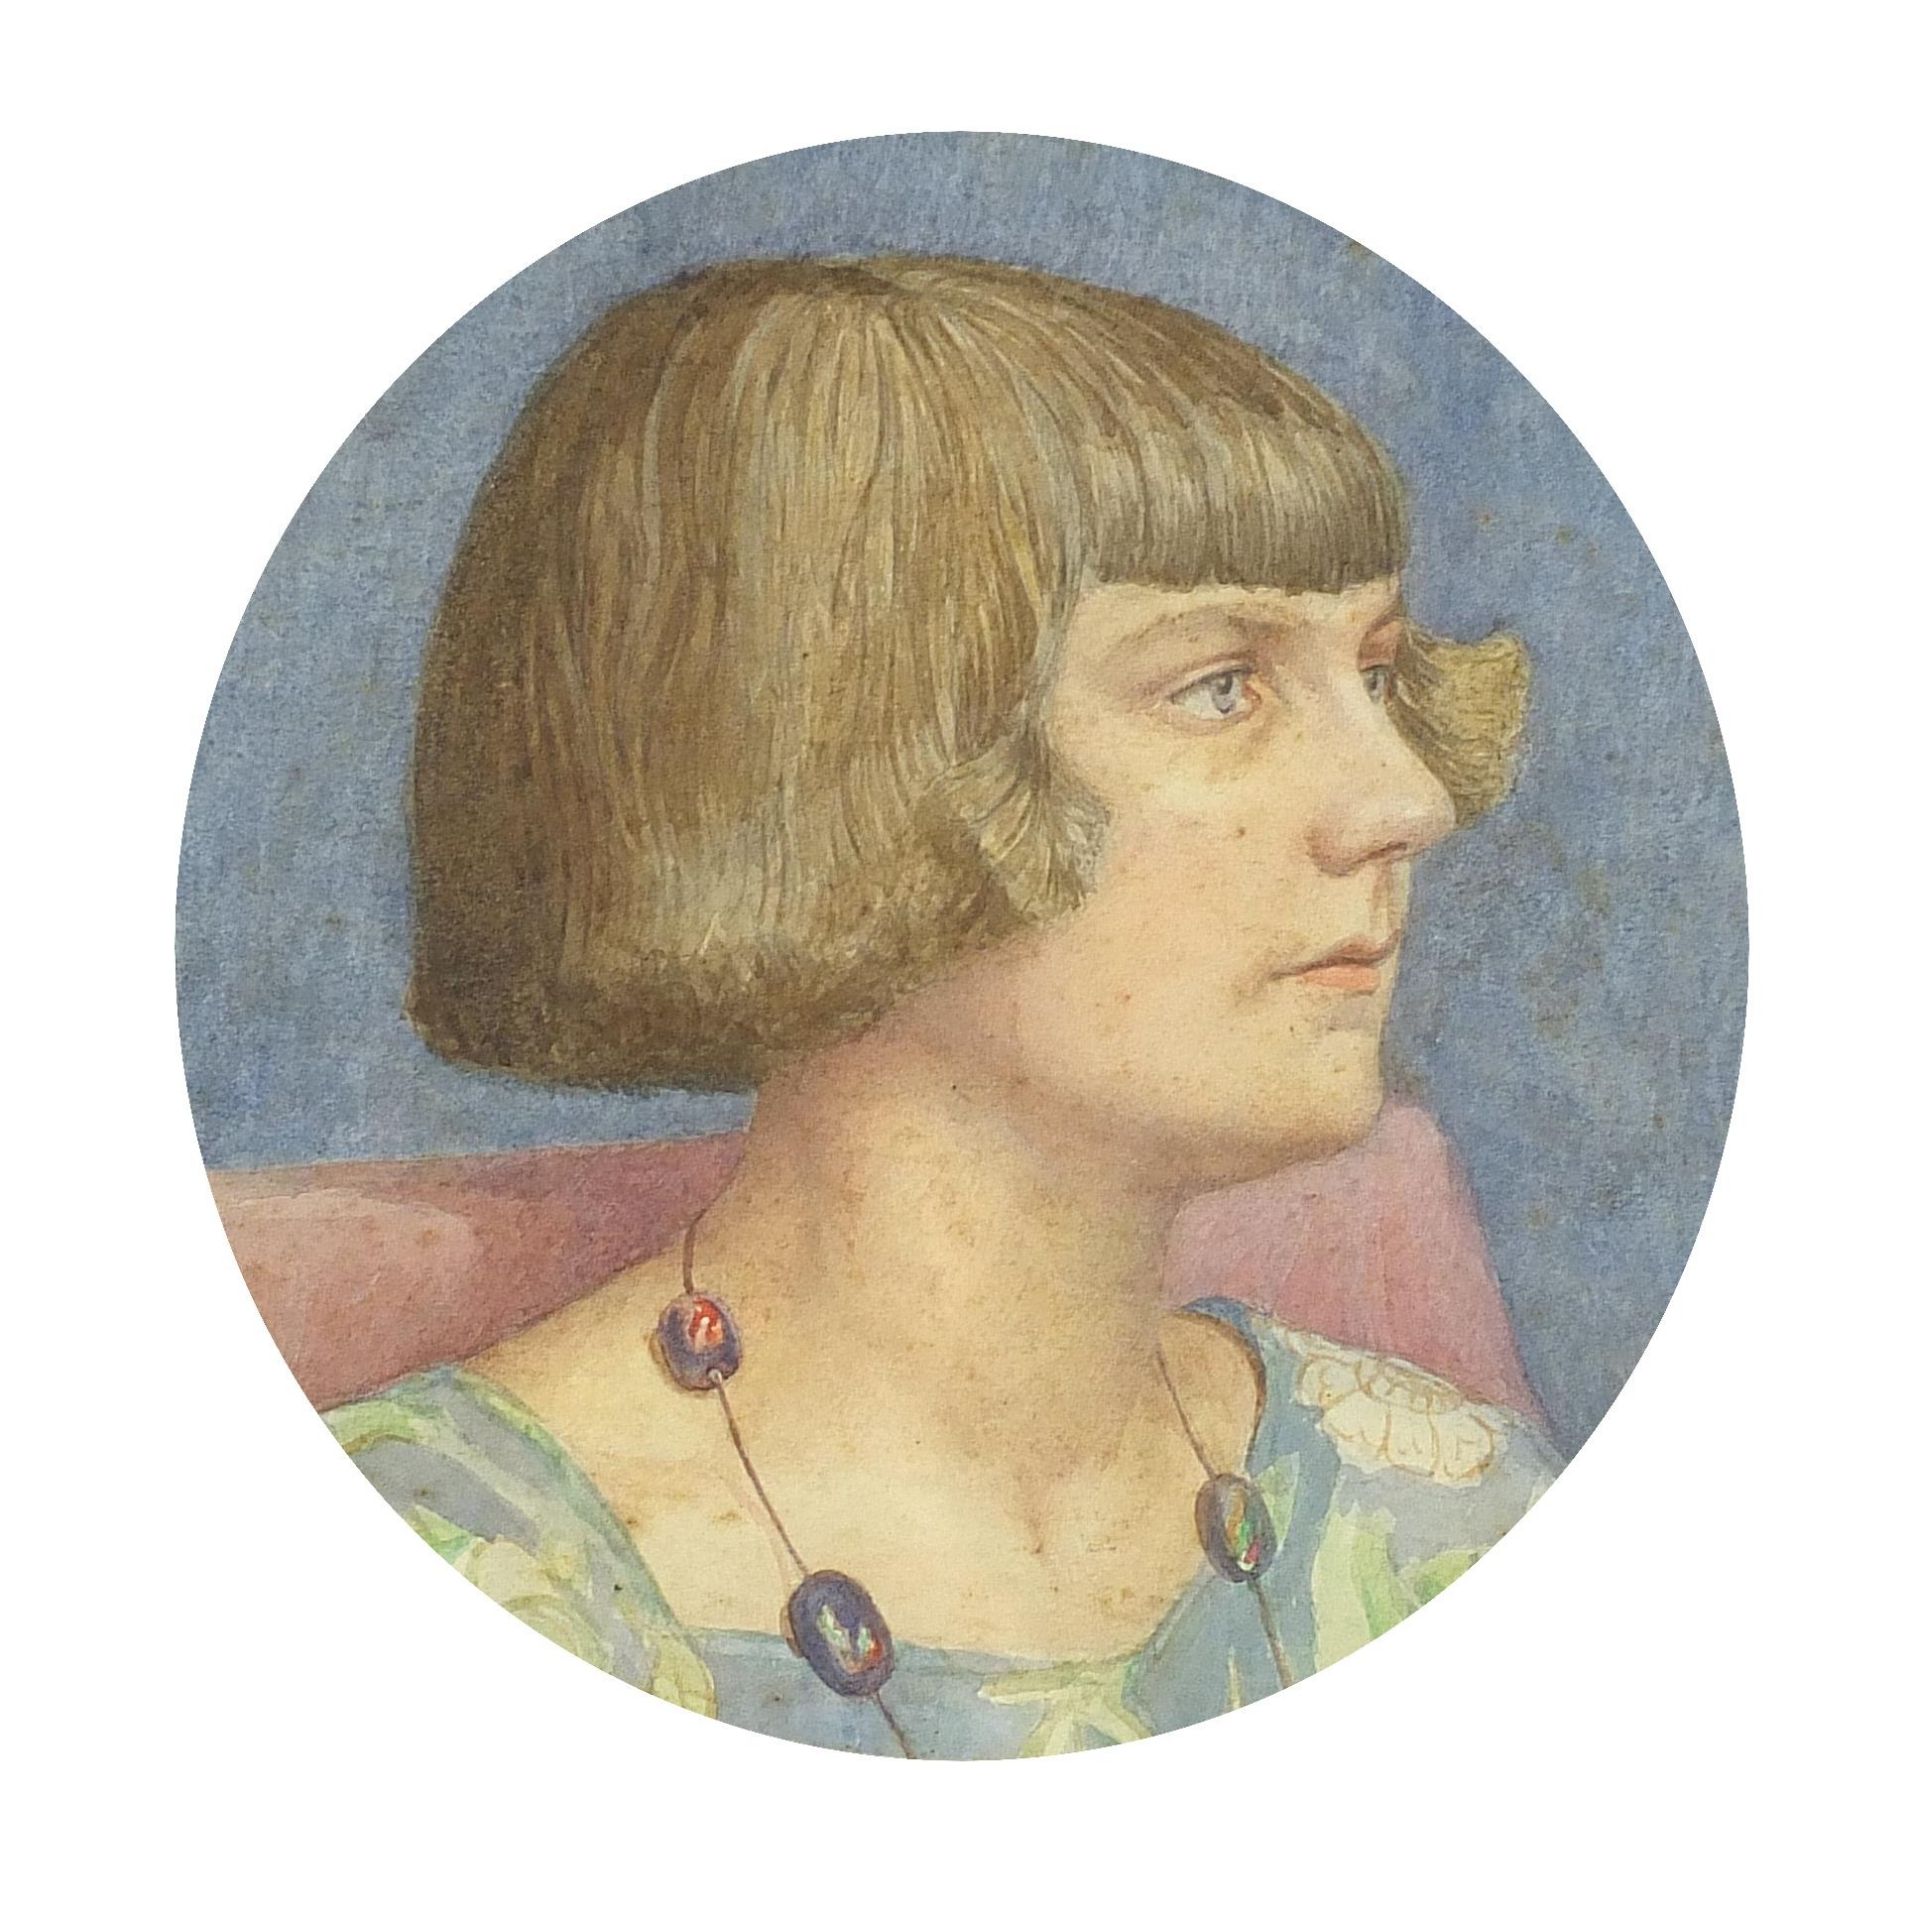 Thomas Capel Walton Smith - Head and shoulders portrait of a female, early 20th century oval